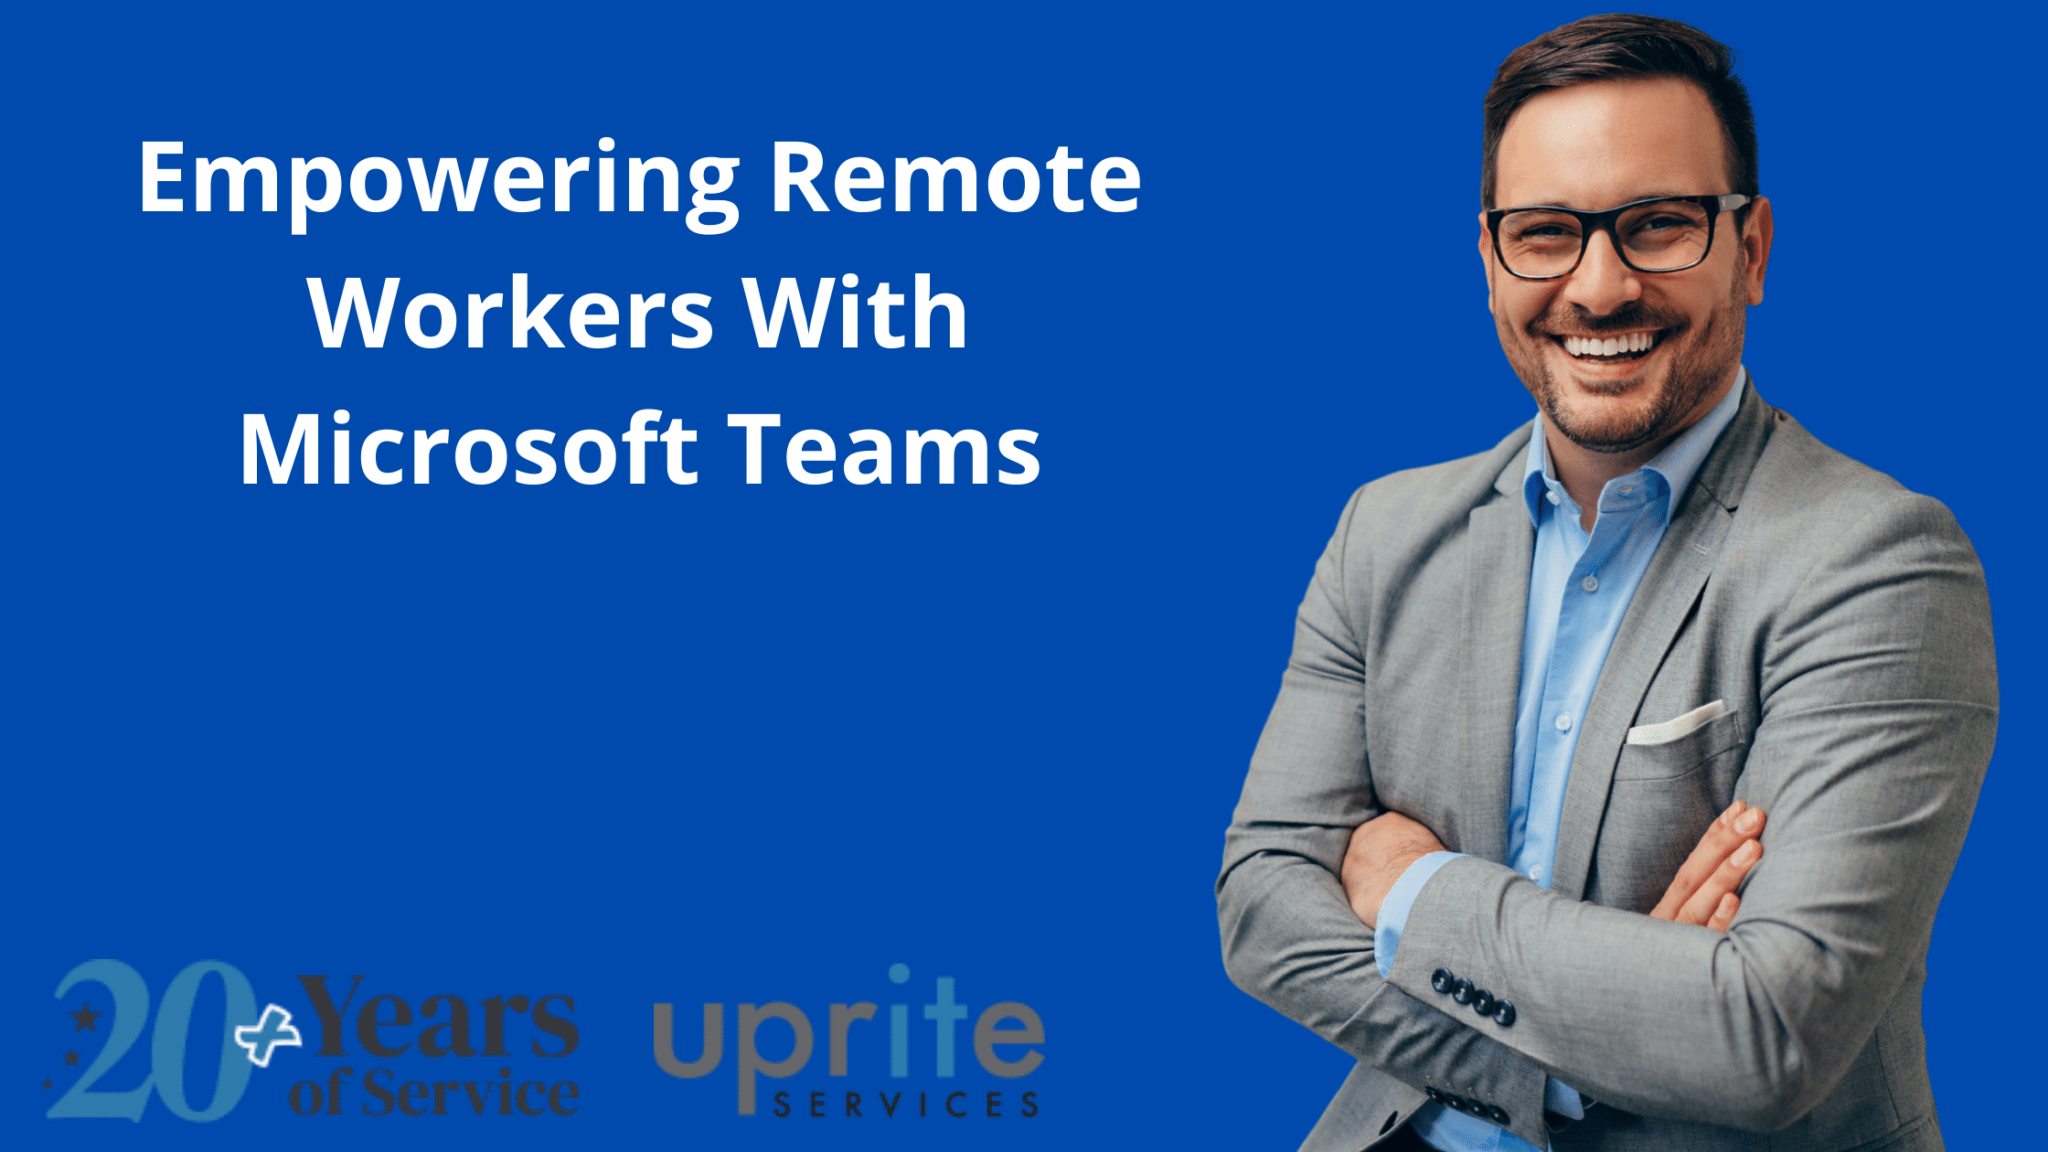 Empowering Remote Workers With Microsoft Teams